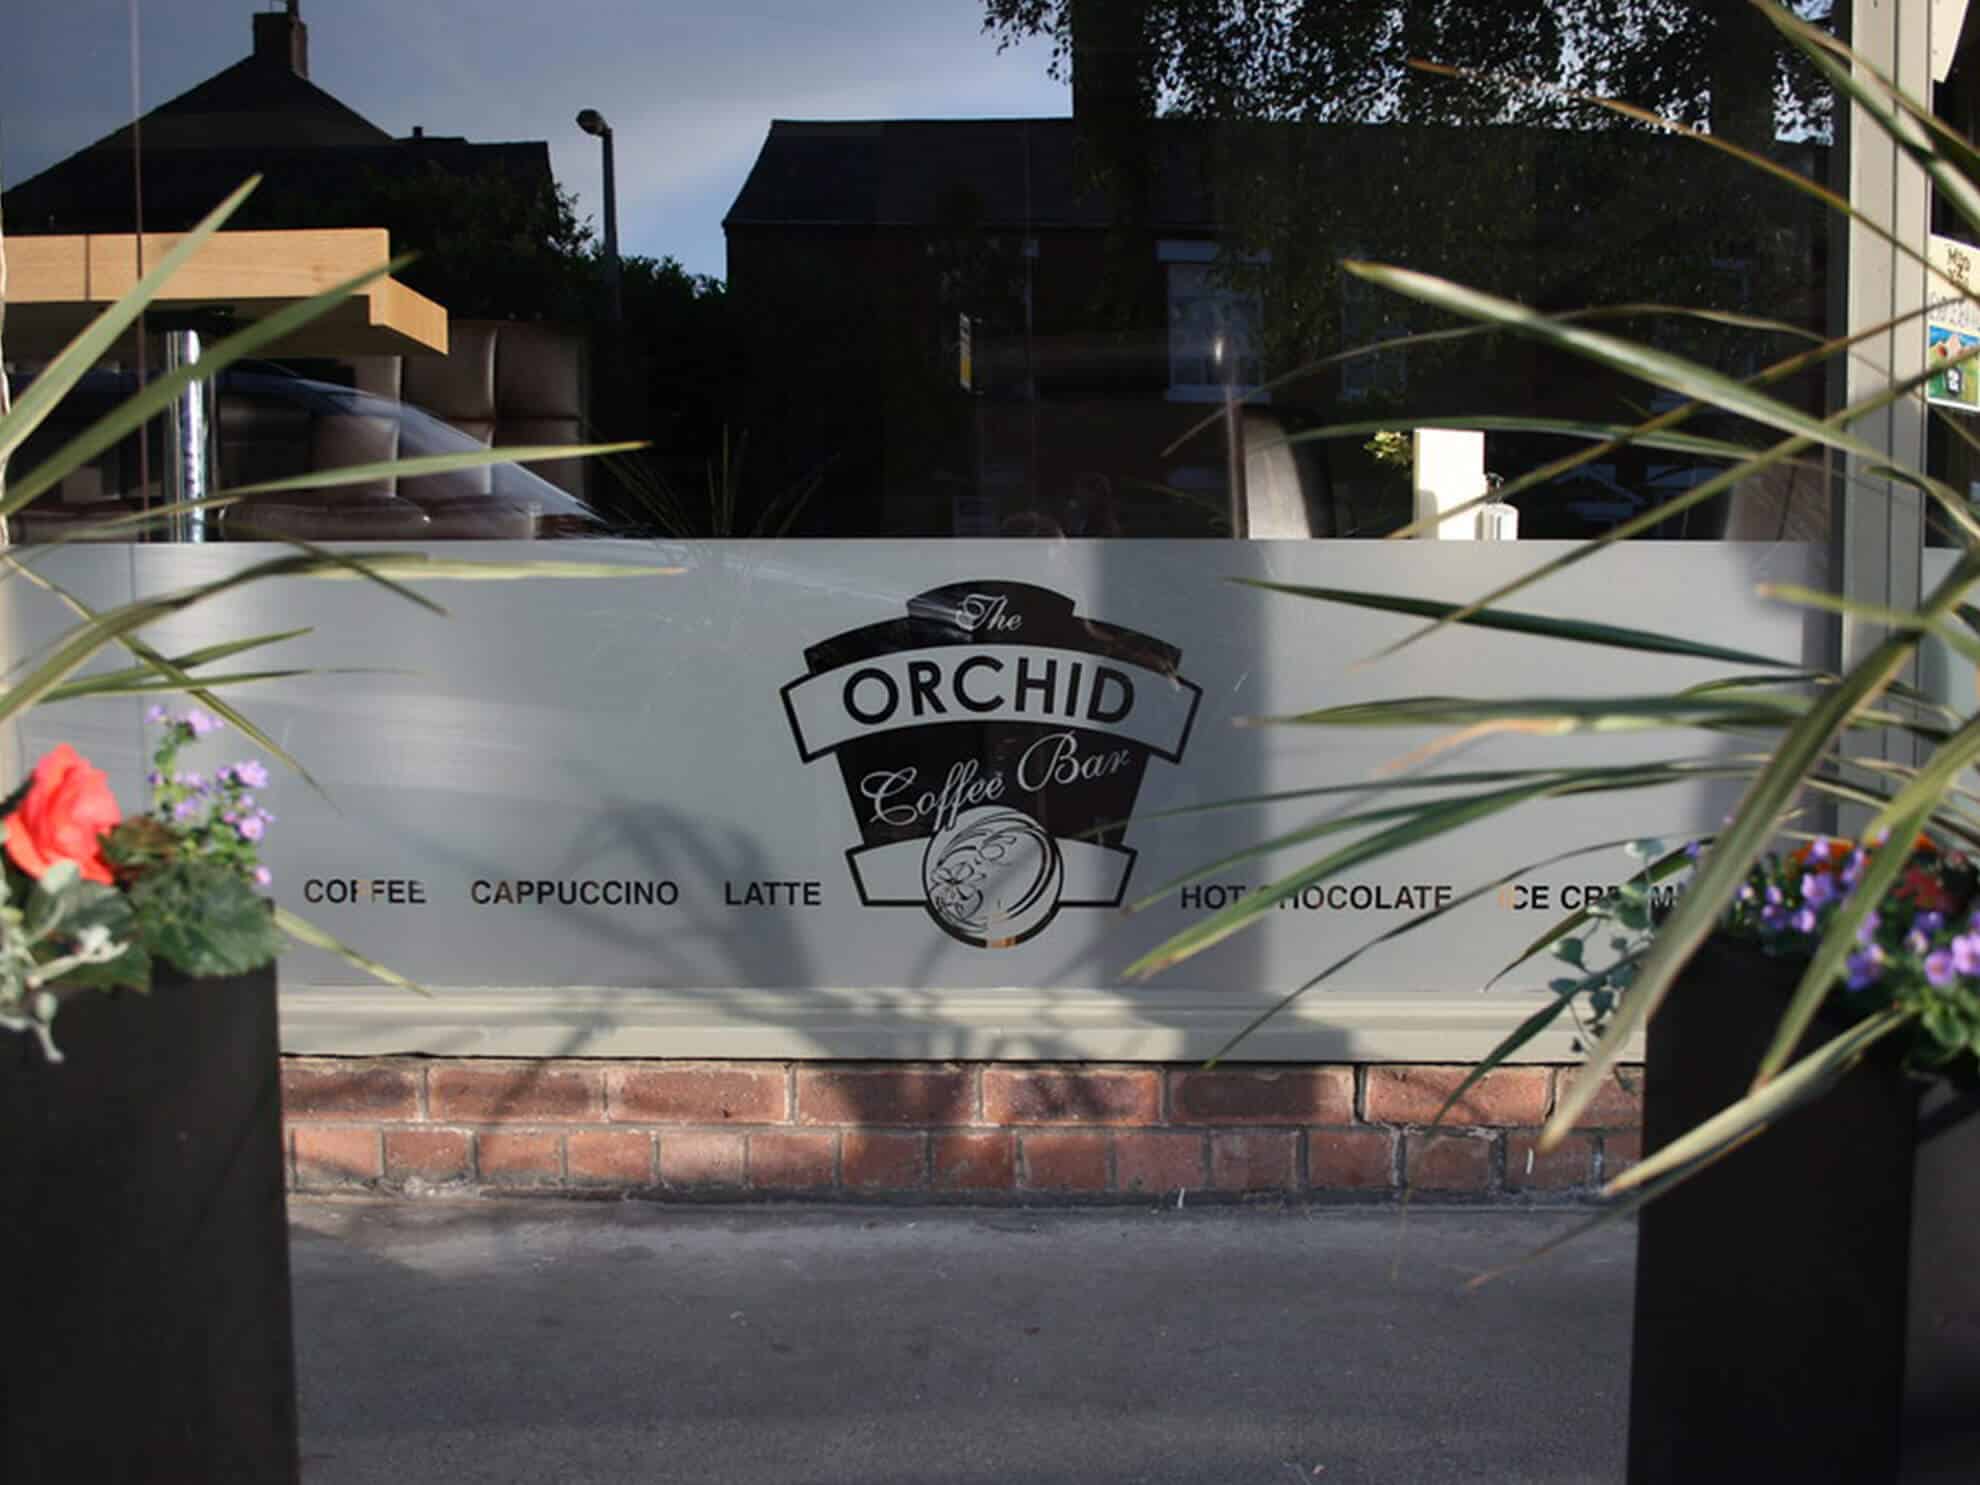 Orchid Coffee Bar external privacy window graphics